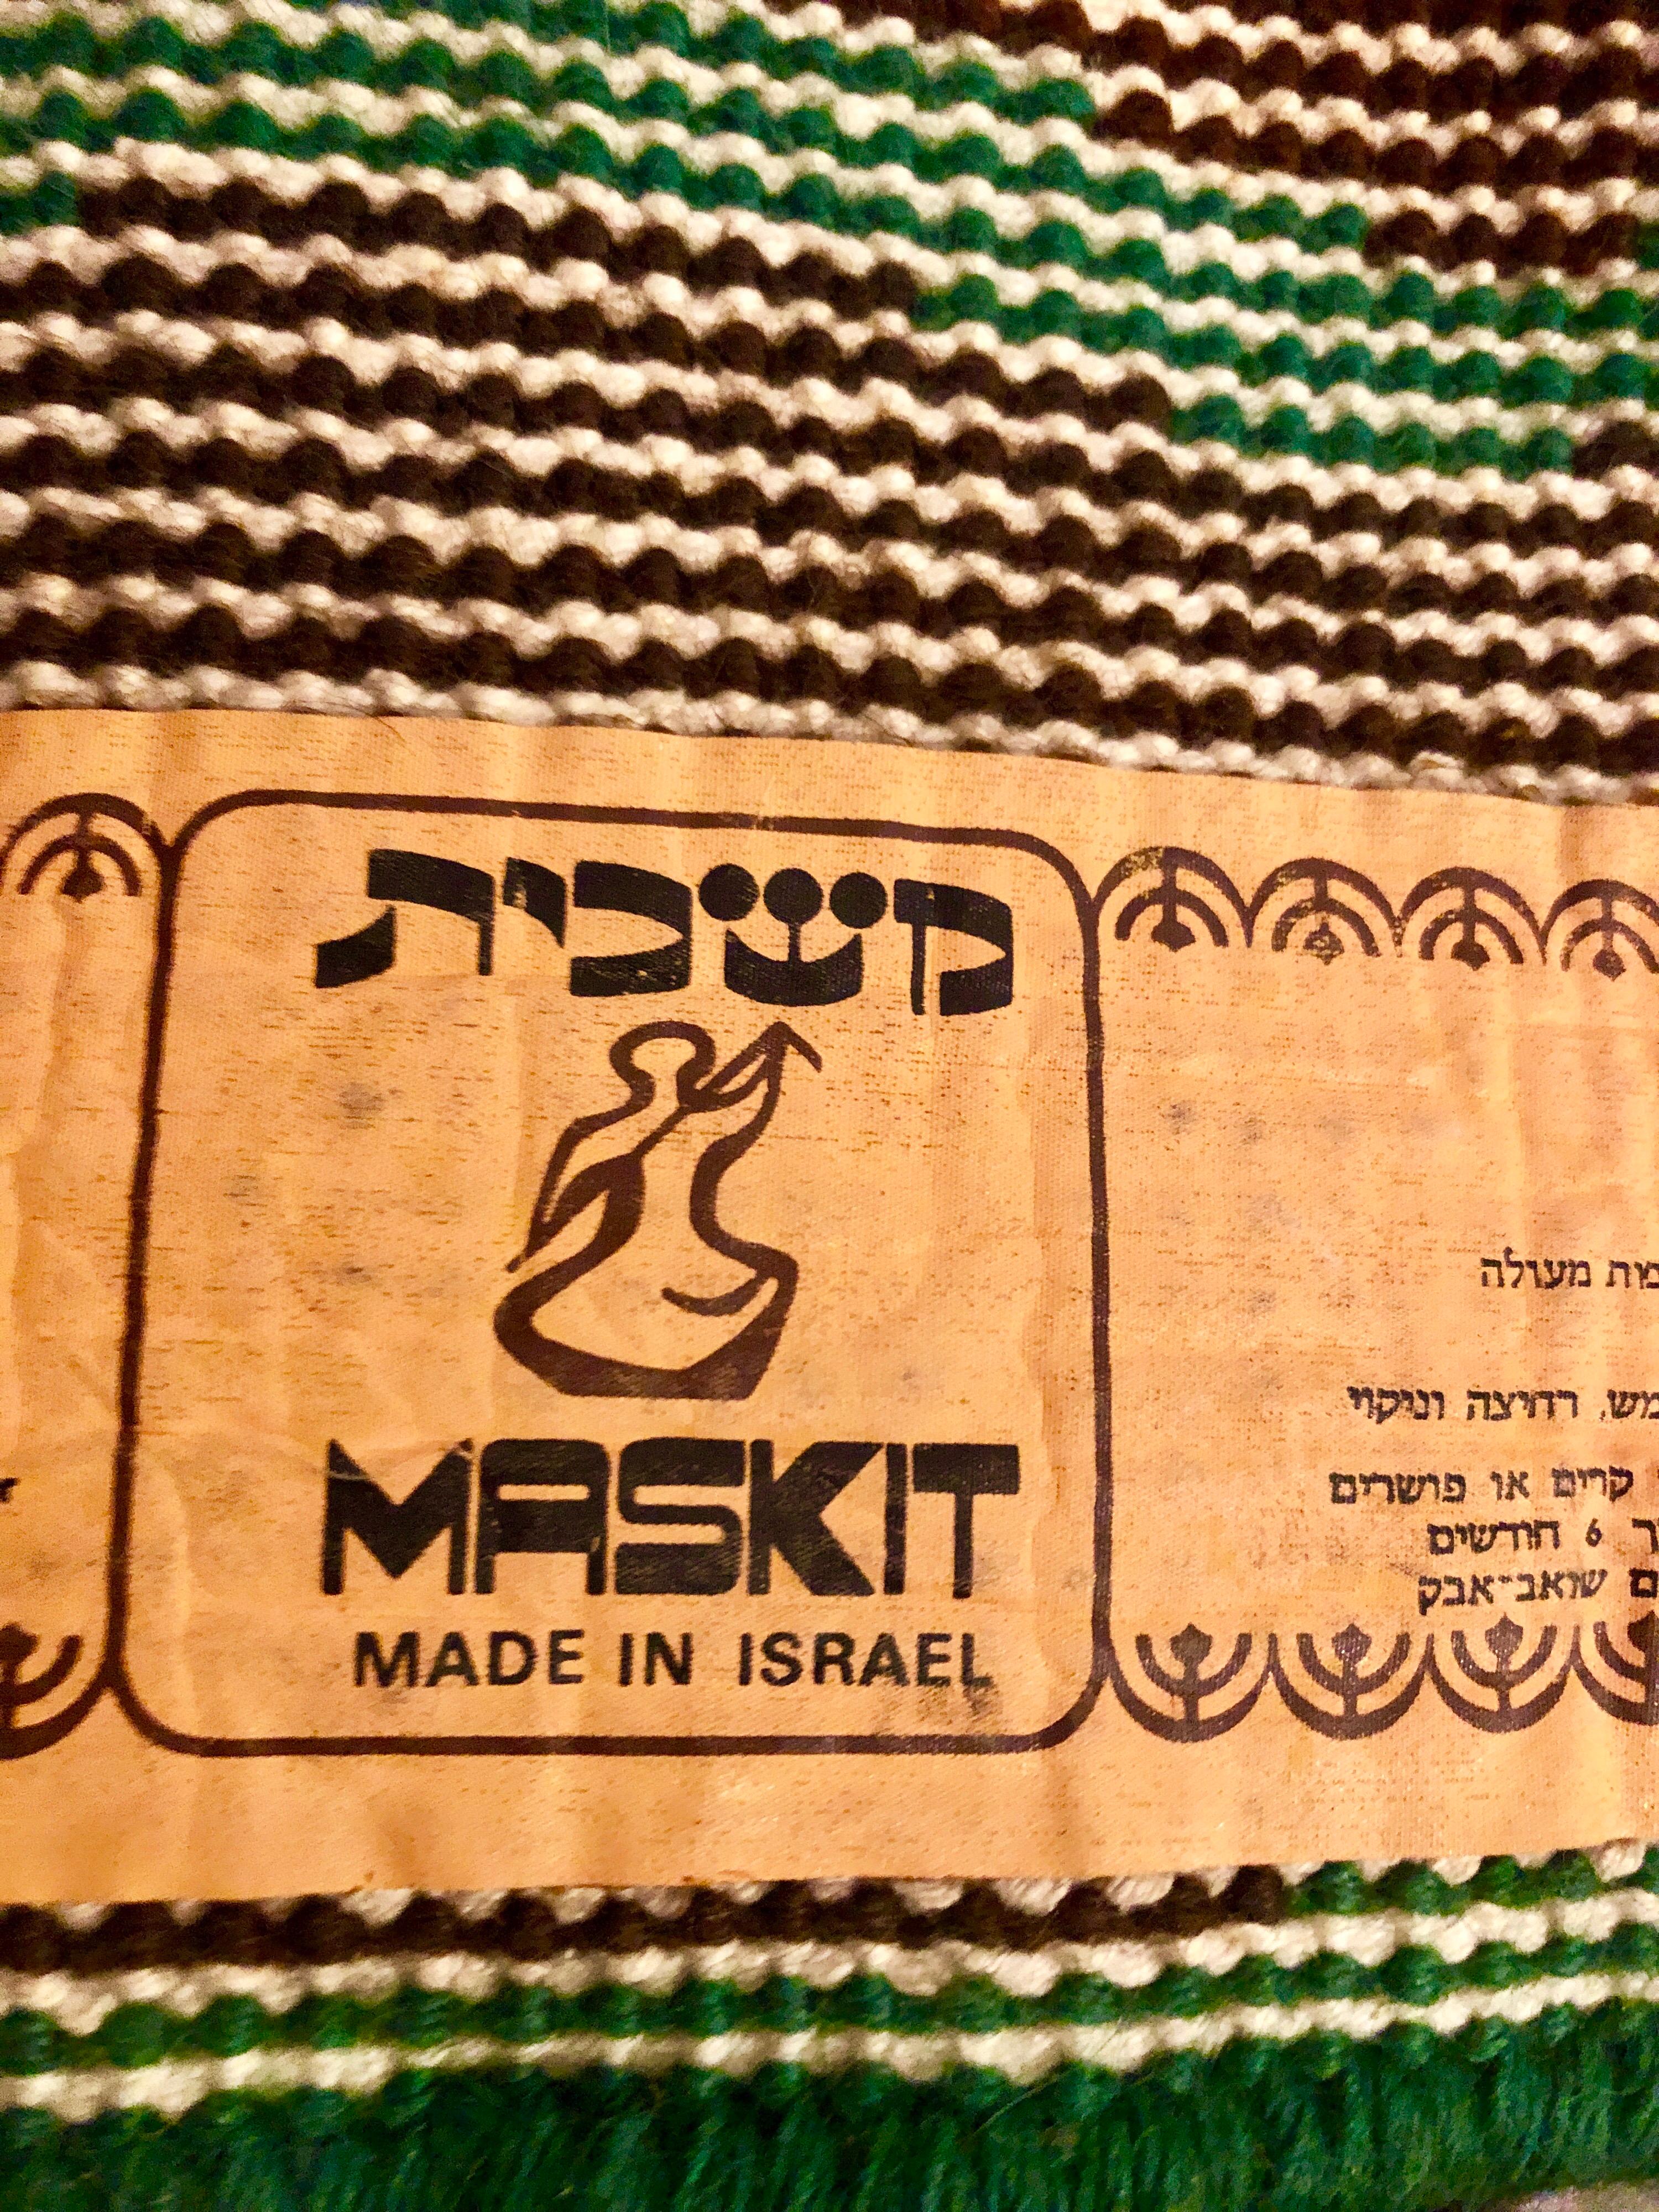 Original vintage tufted circa 1970's tapestry pile rug, hand knotted wool rug wall hanging.
Israeli landscape with palm tree and blazing desert sun.


Maskit (Hebrew: משכית‎) is an Israeli fashion house founded in 1954 by Ruth Dayan, wife of Moshe